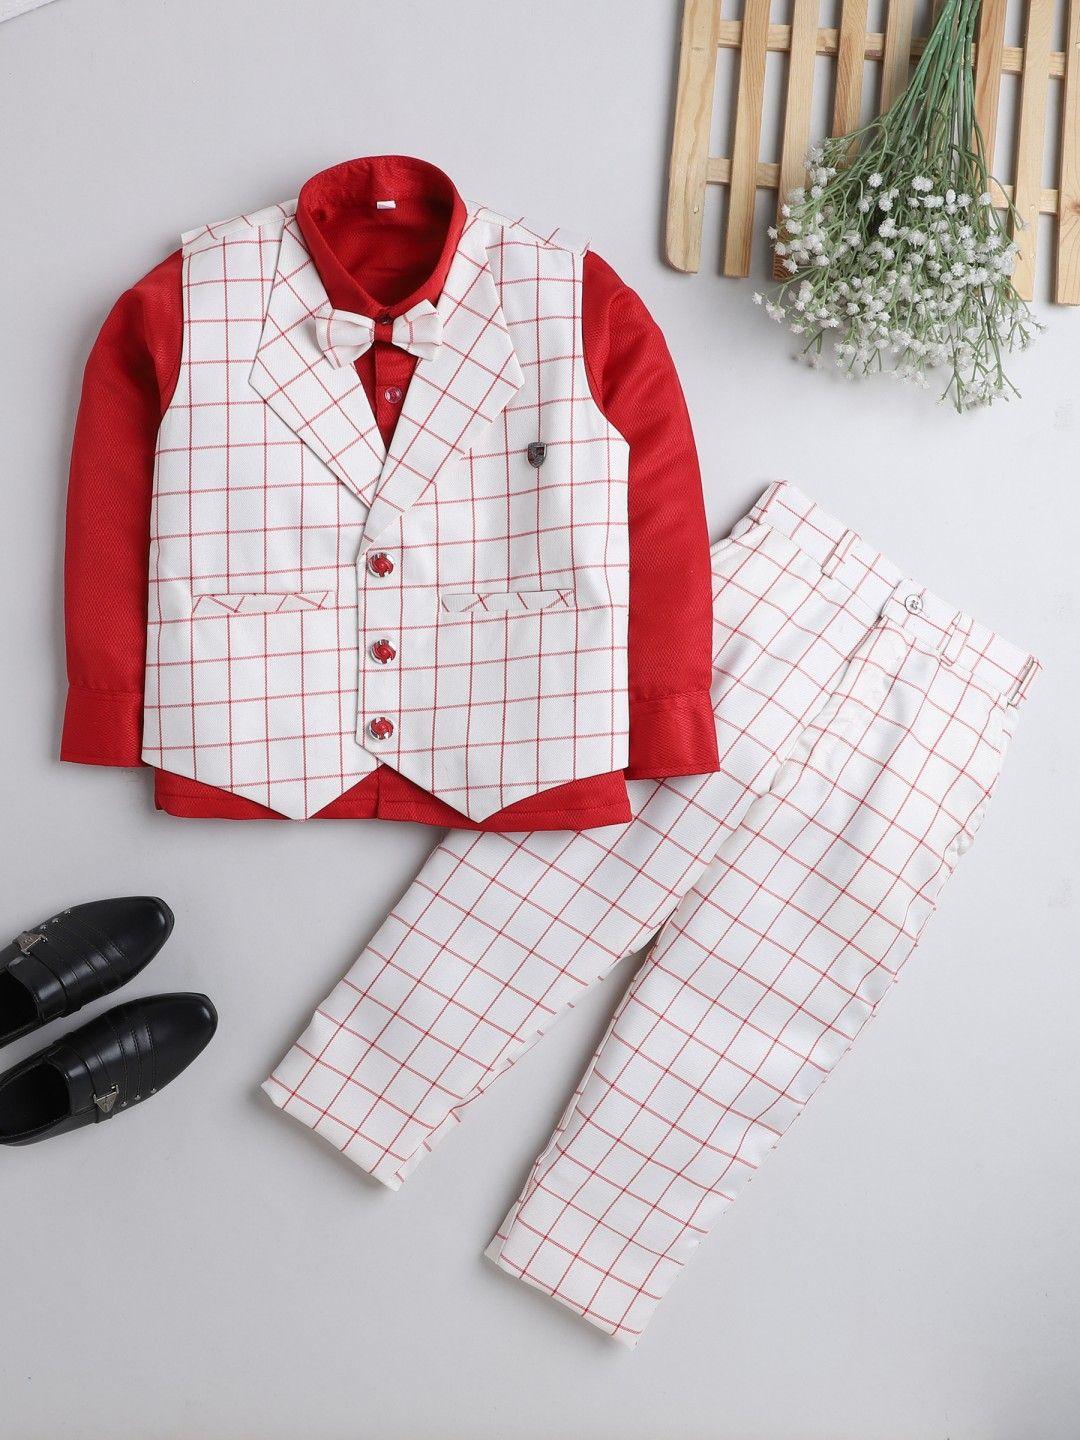 dkgf fashion boys red & cream-coloured checked shirt & trousers